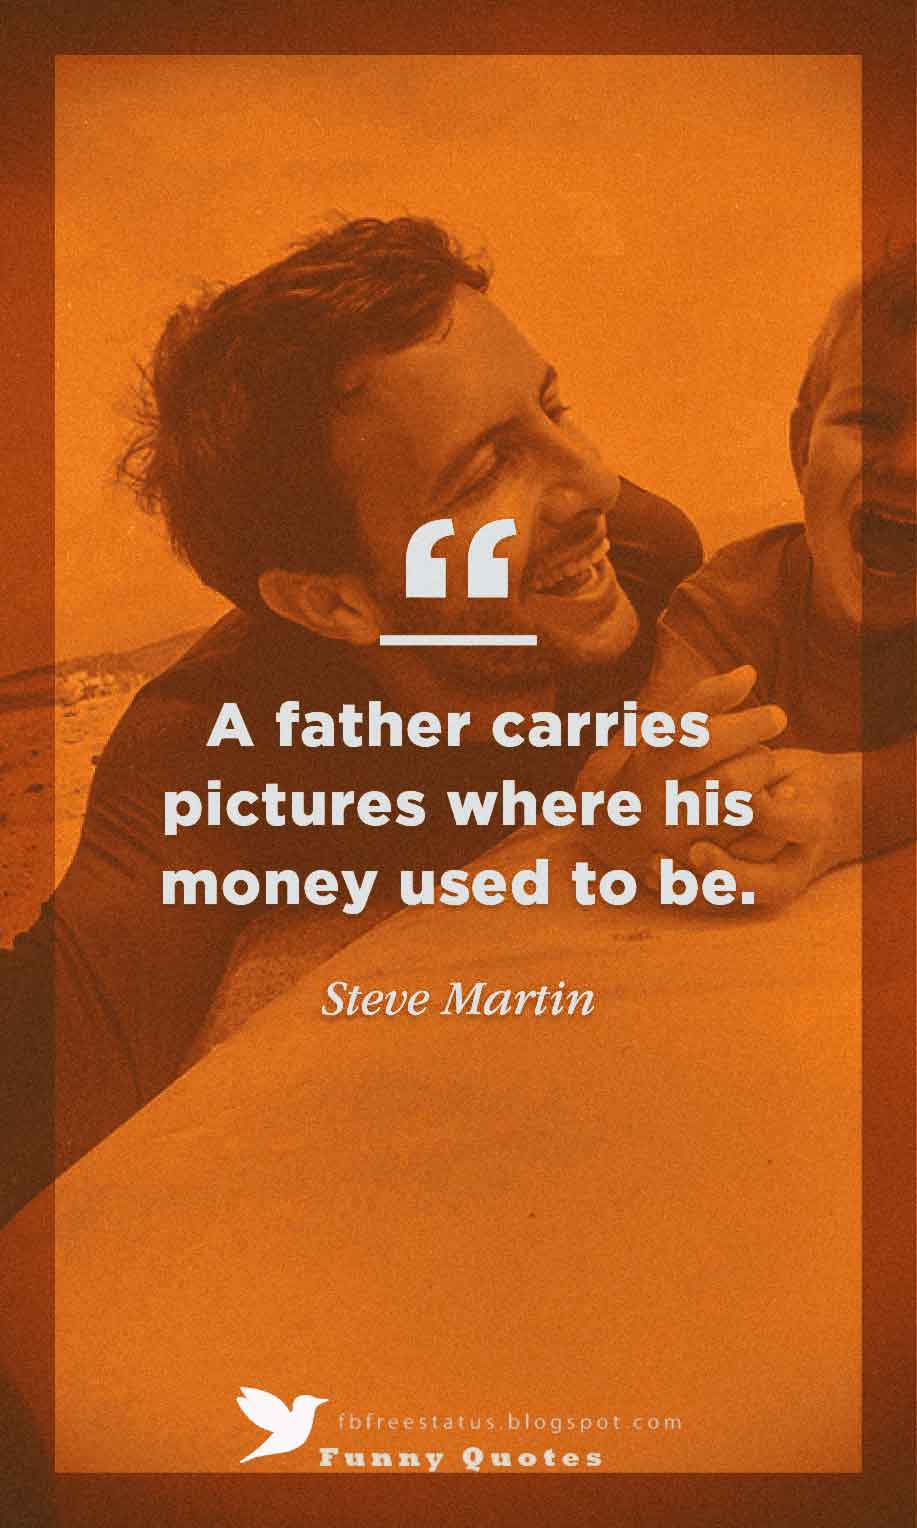 Inspirational Fathers Day Quotes, "A Father Carries Pictures Where His Money Used To Be" - Steve Martin